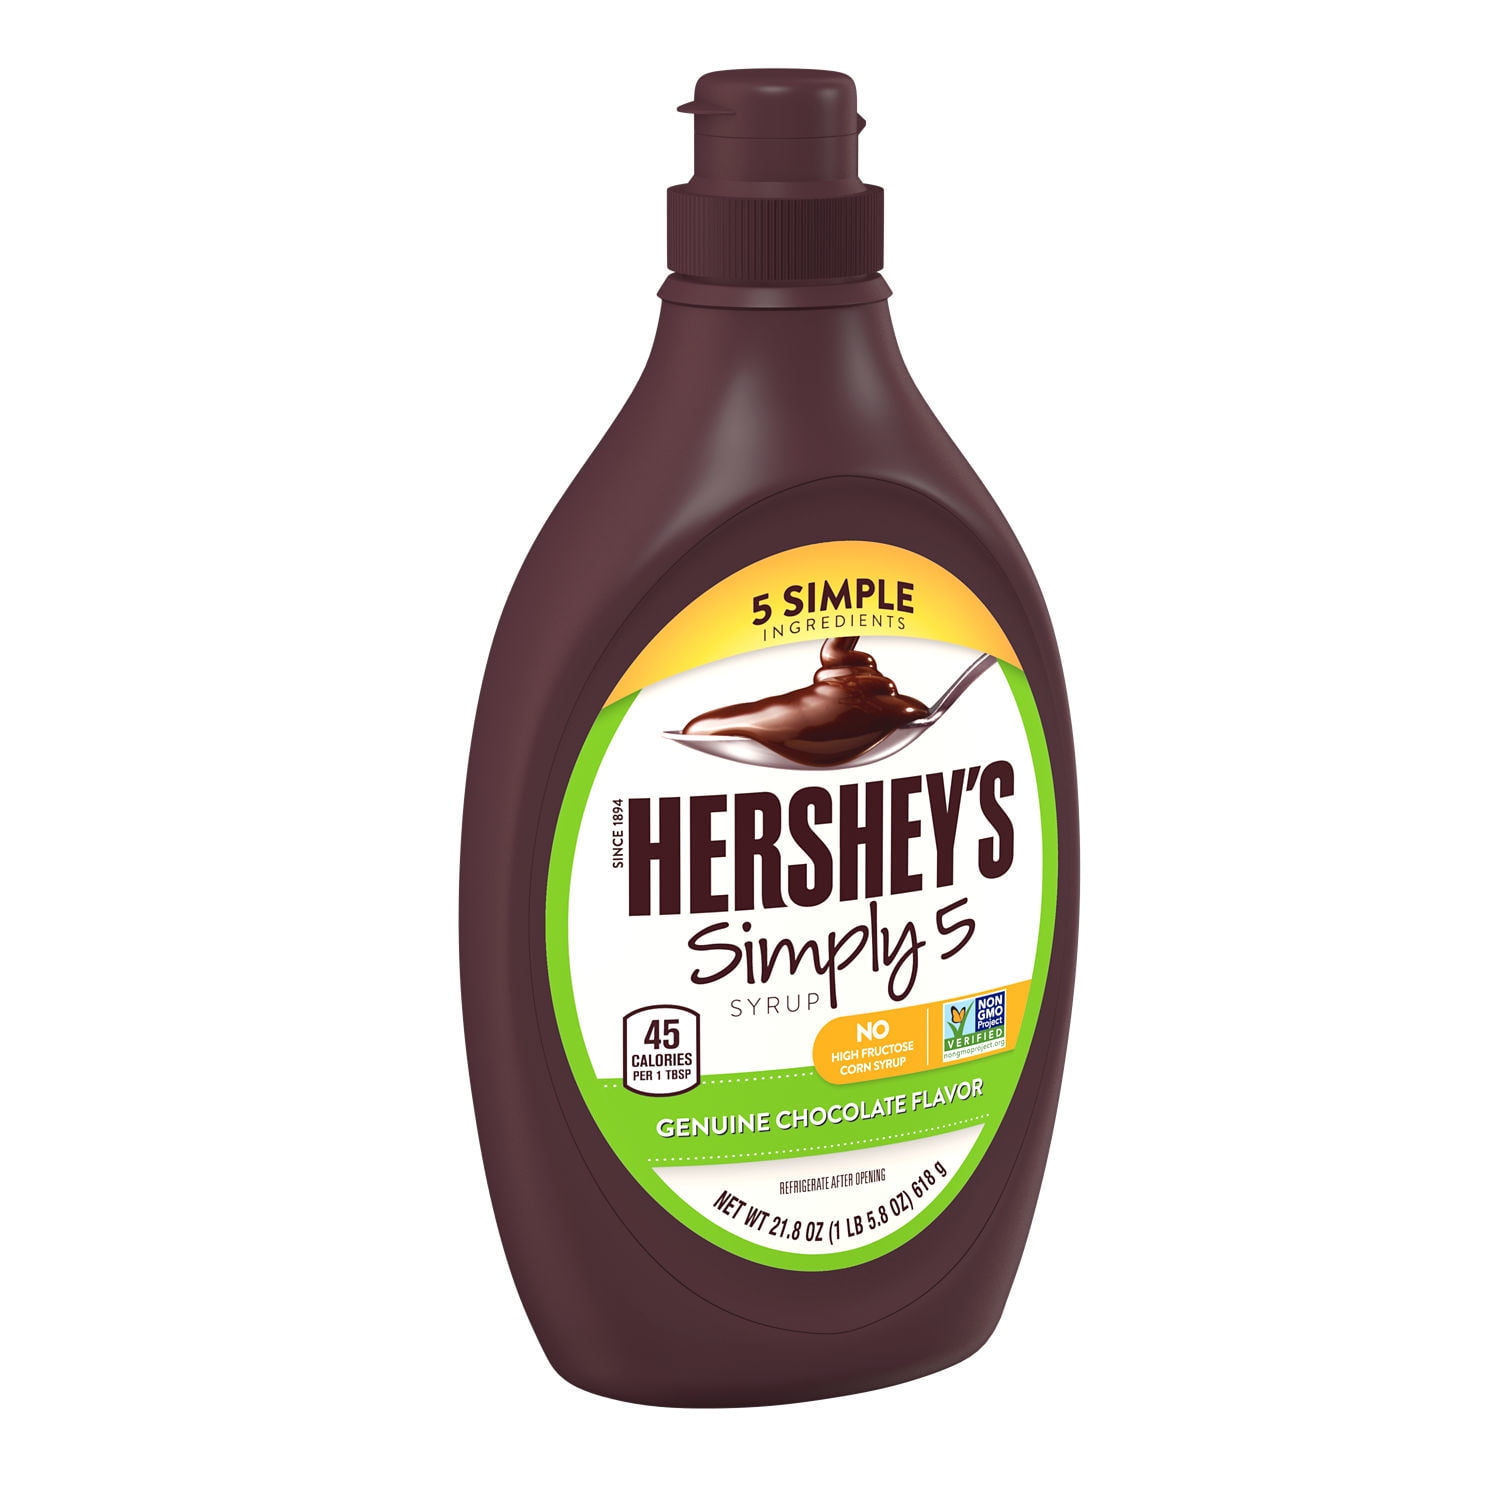 HERSHEY'S Simply 5 Chocolate Ingredient, Gluten Free, Non GMO Syrup Bottle, 21.8 oz